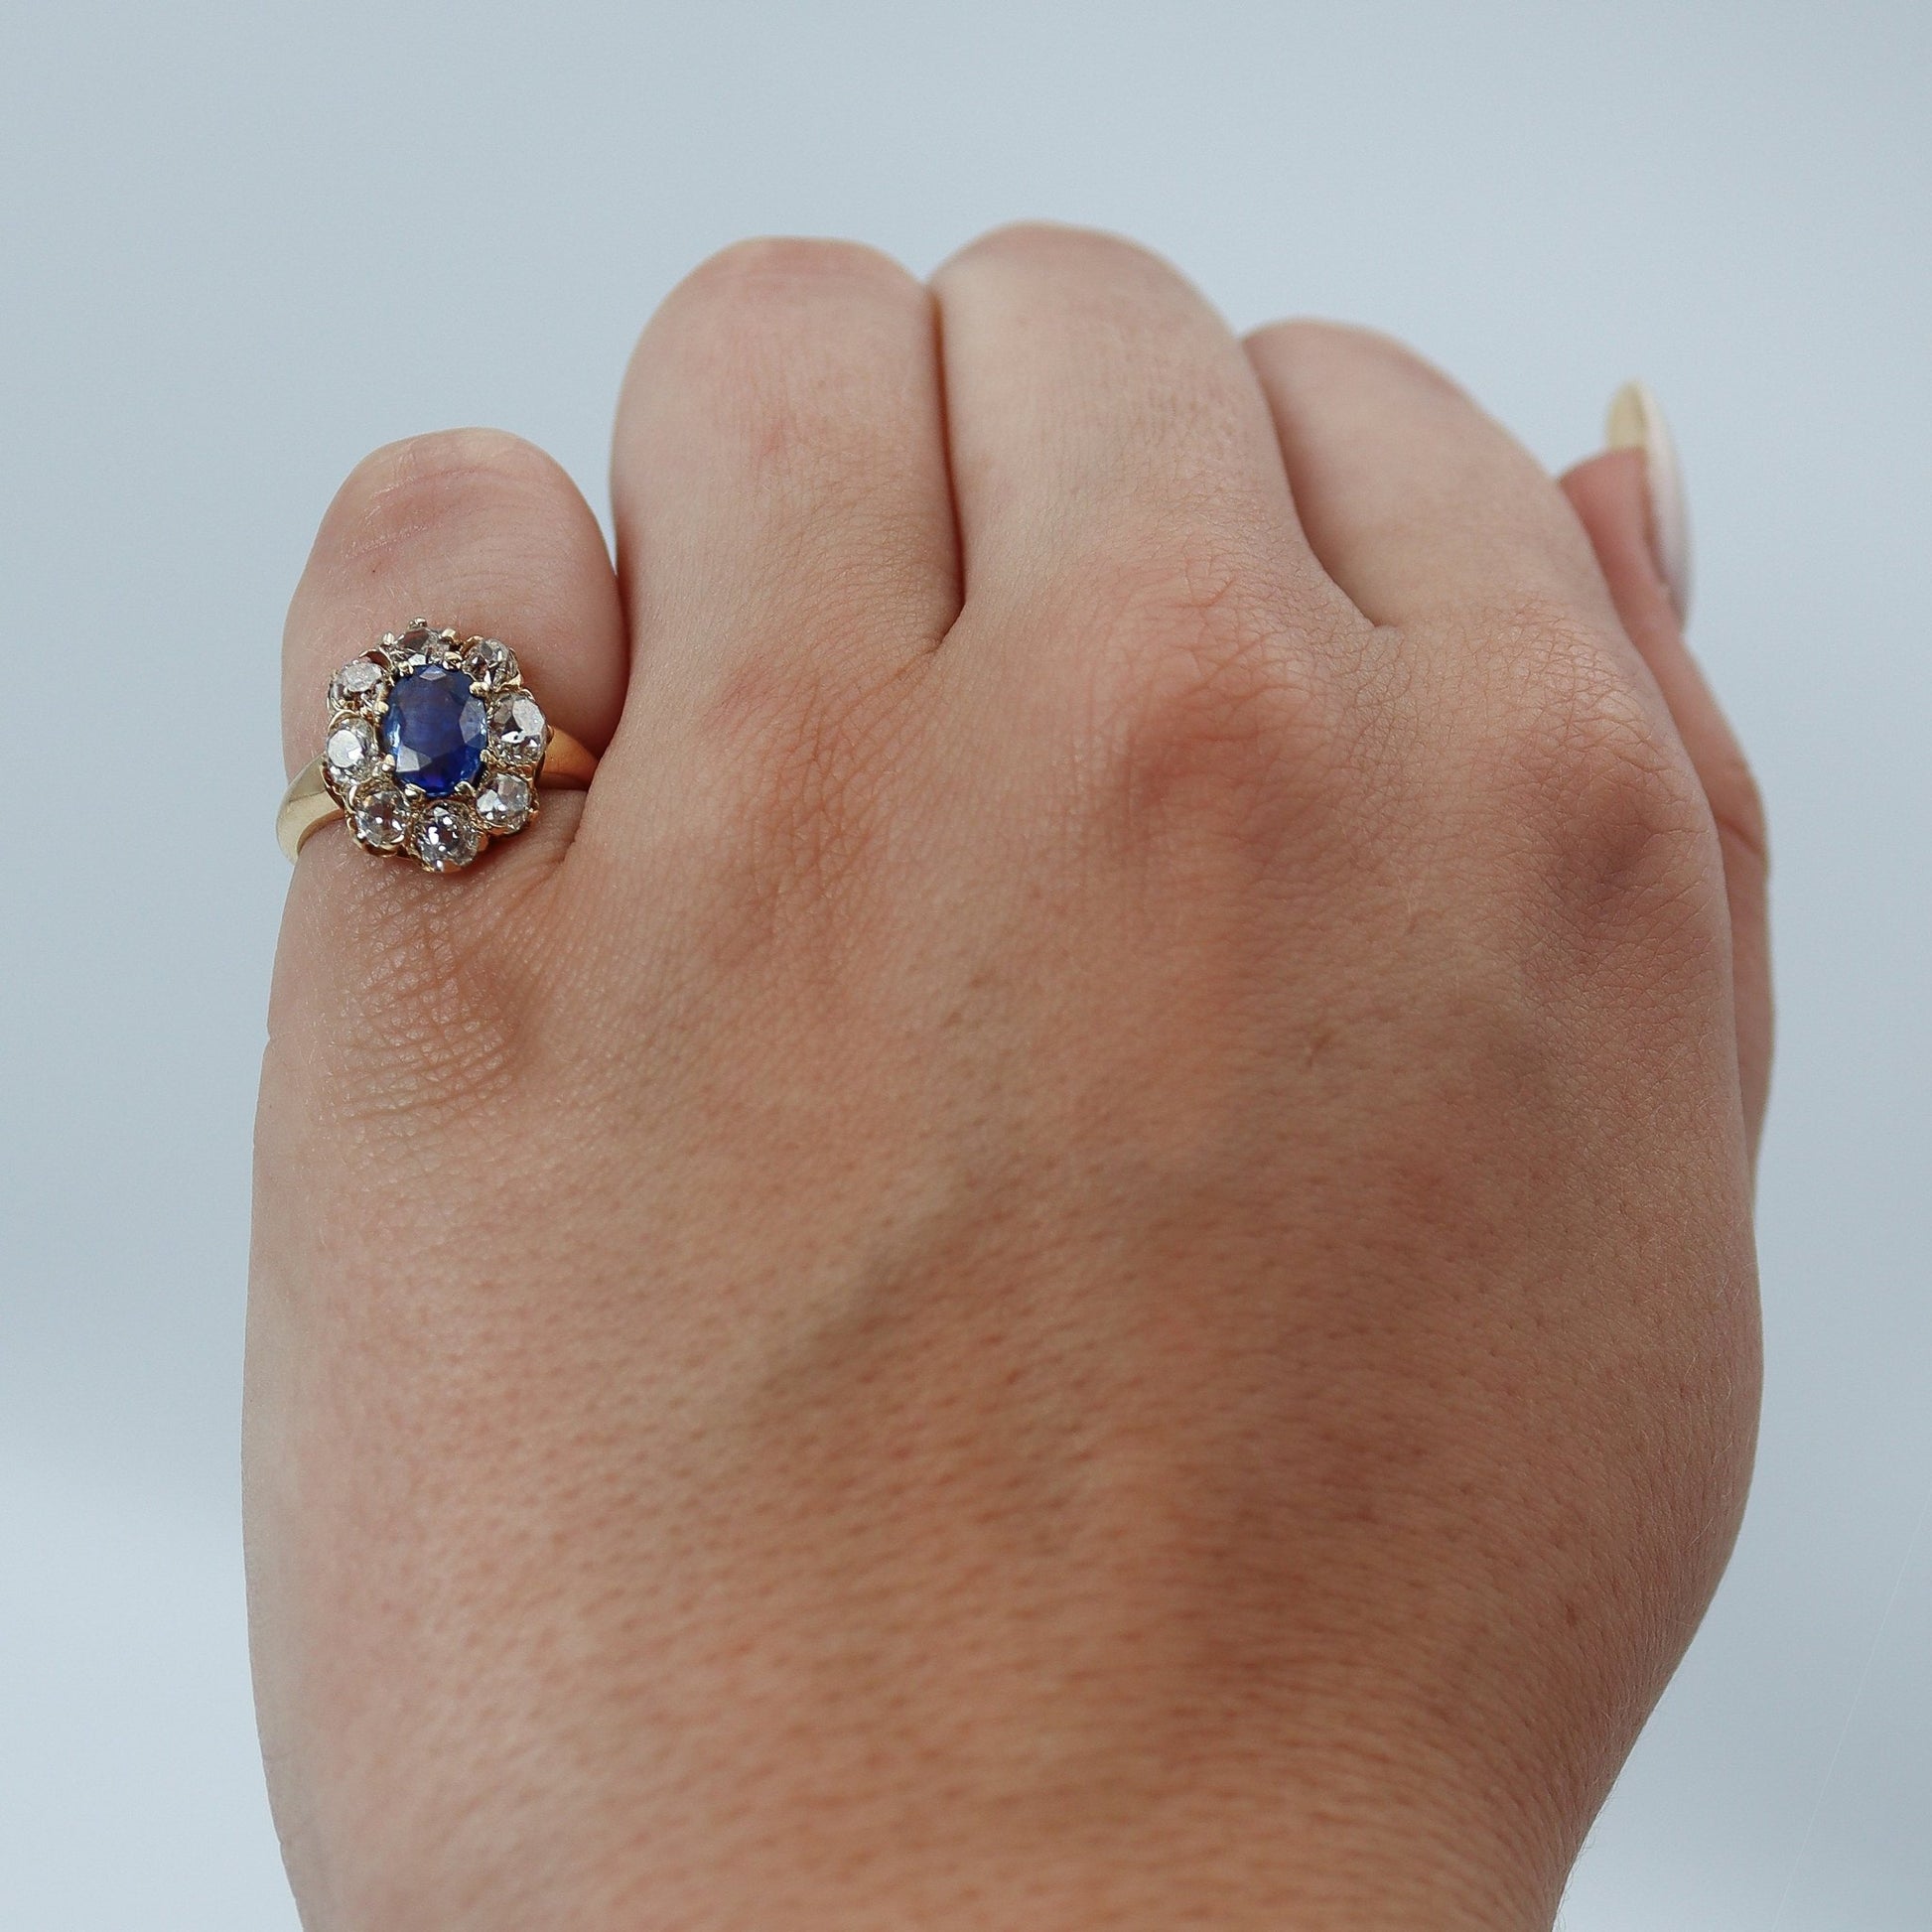 Lovely Art Deco 18 carat Gold 1 Carat Sapphire and Diamond Cluster Ring - Friar House